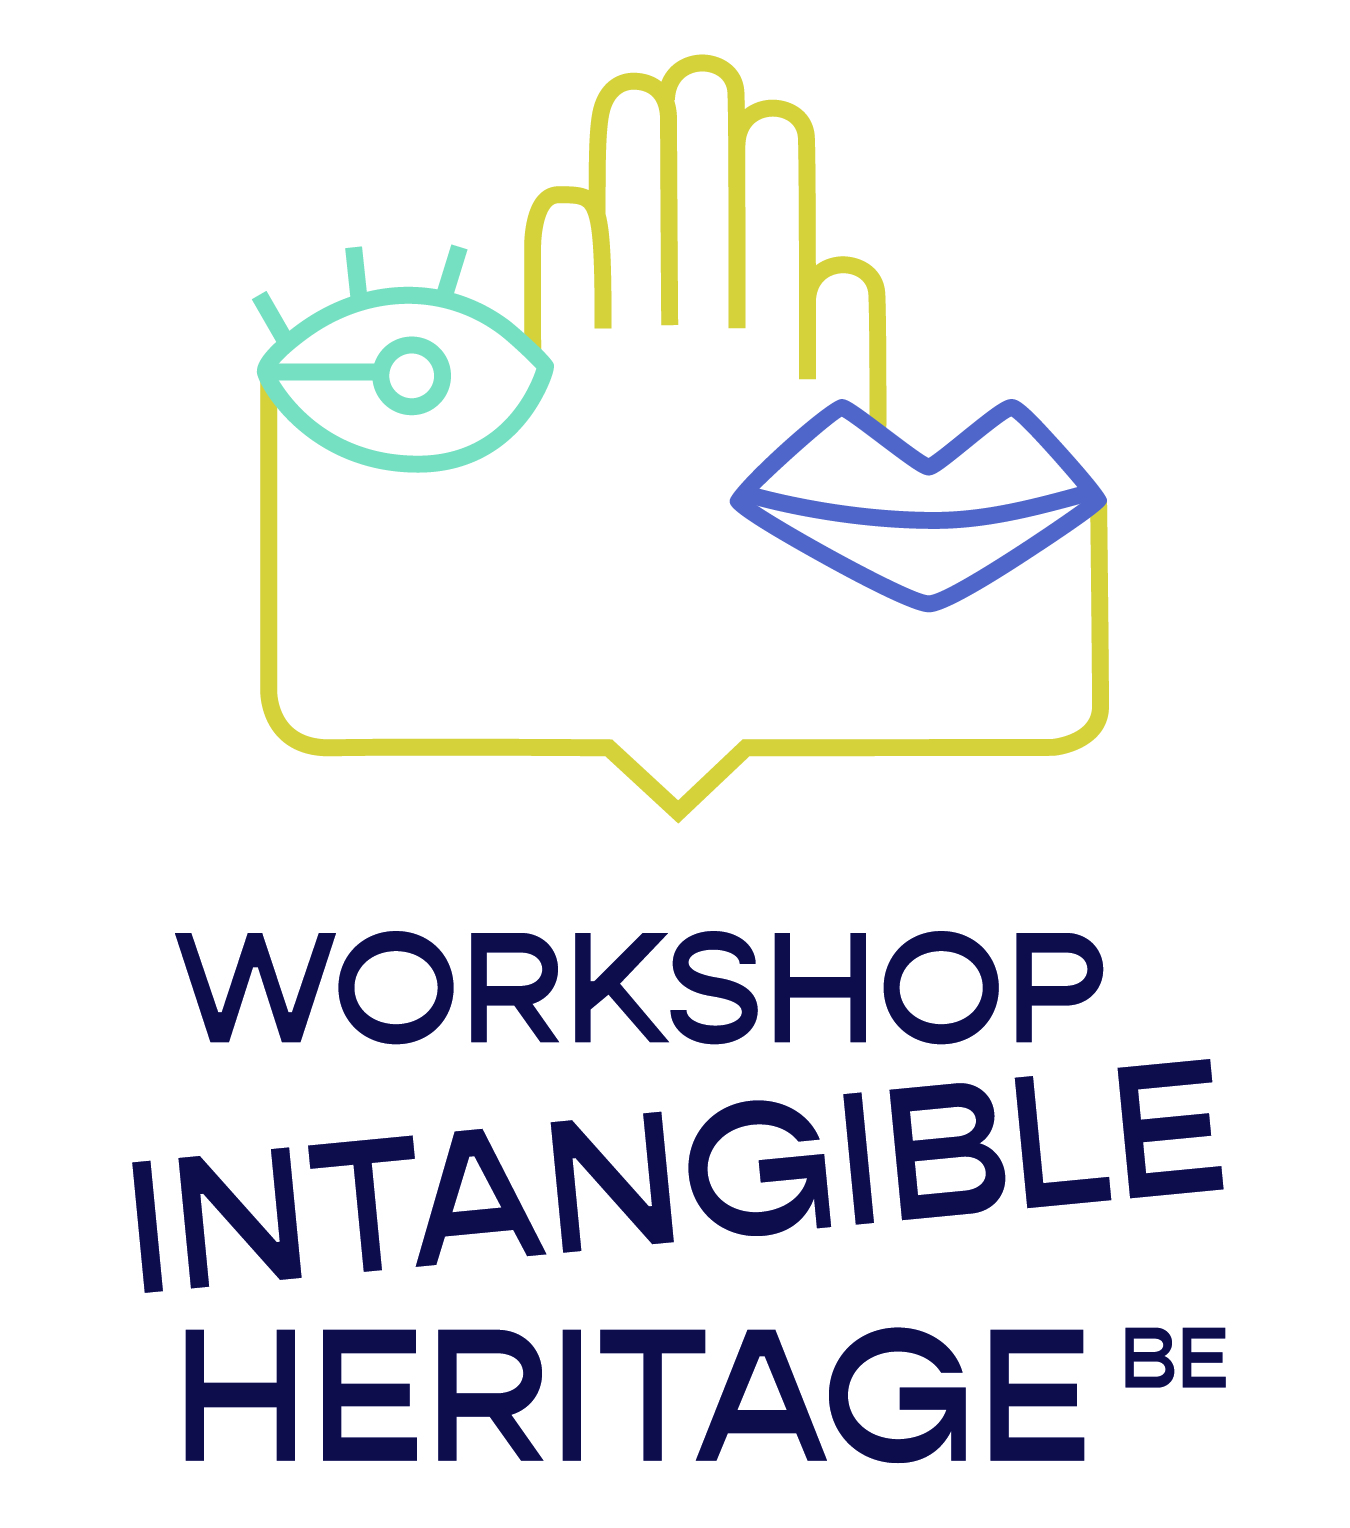 Workshop intangible heritage (BE)